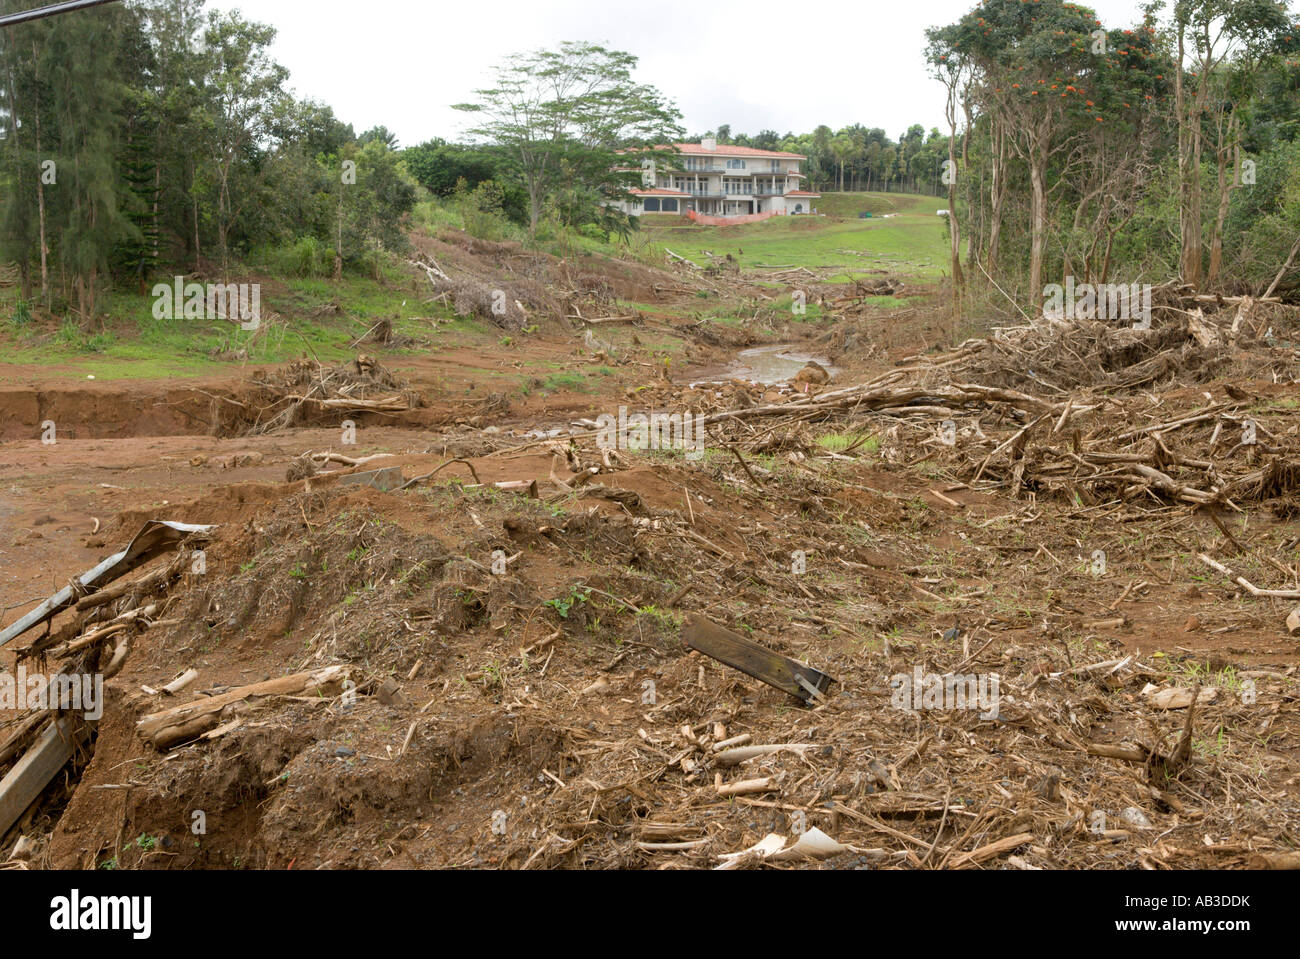 Flood damage from heavy rains and subsequent collapse of a dam Kauai Stock Photo